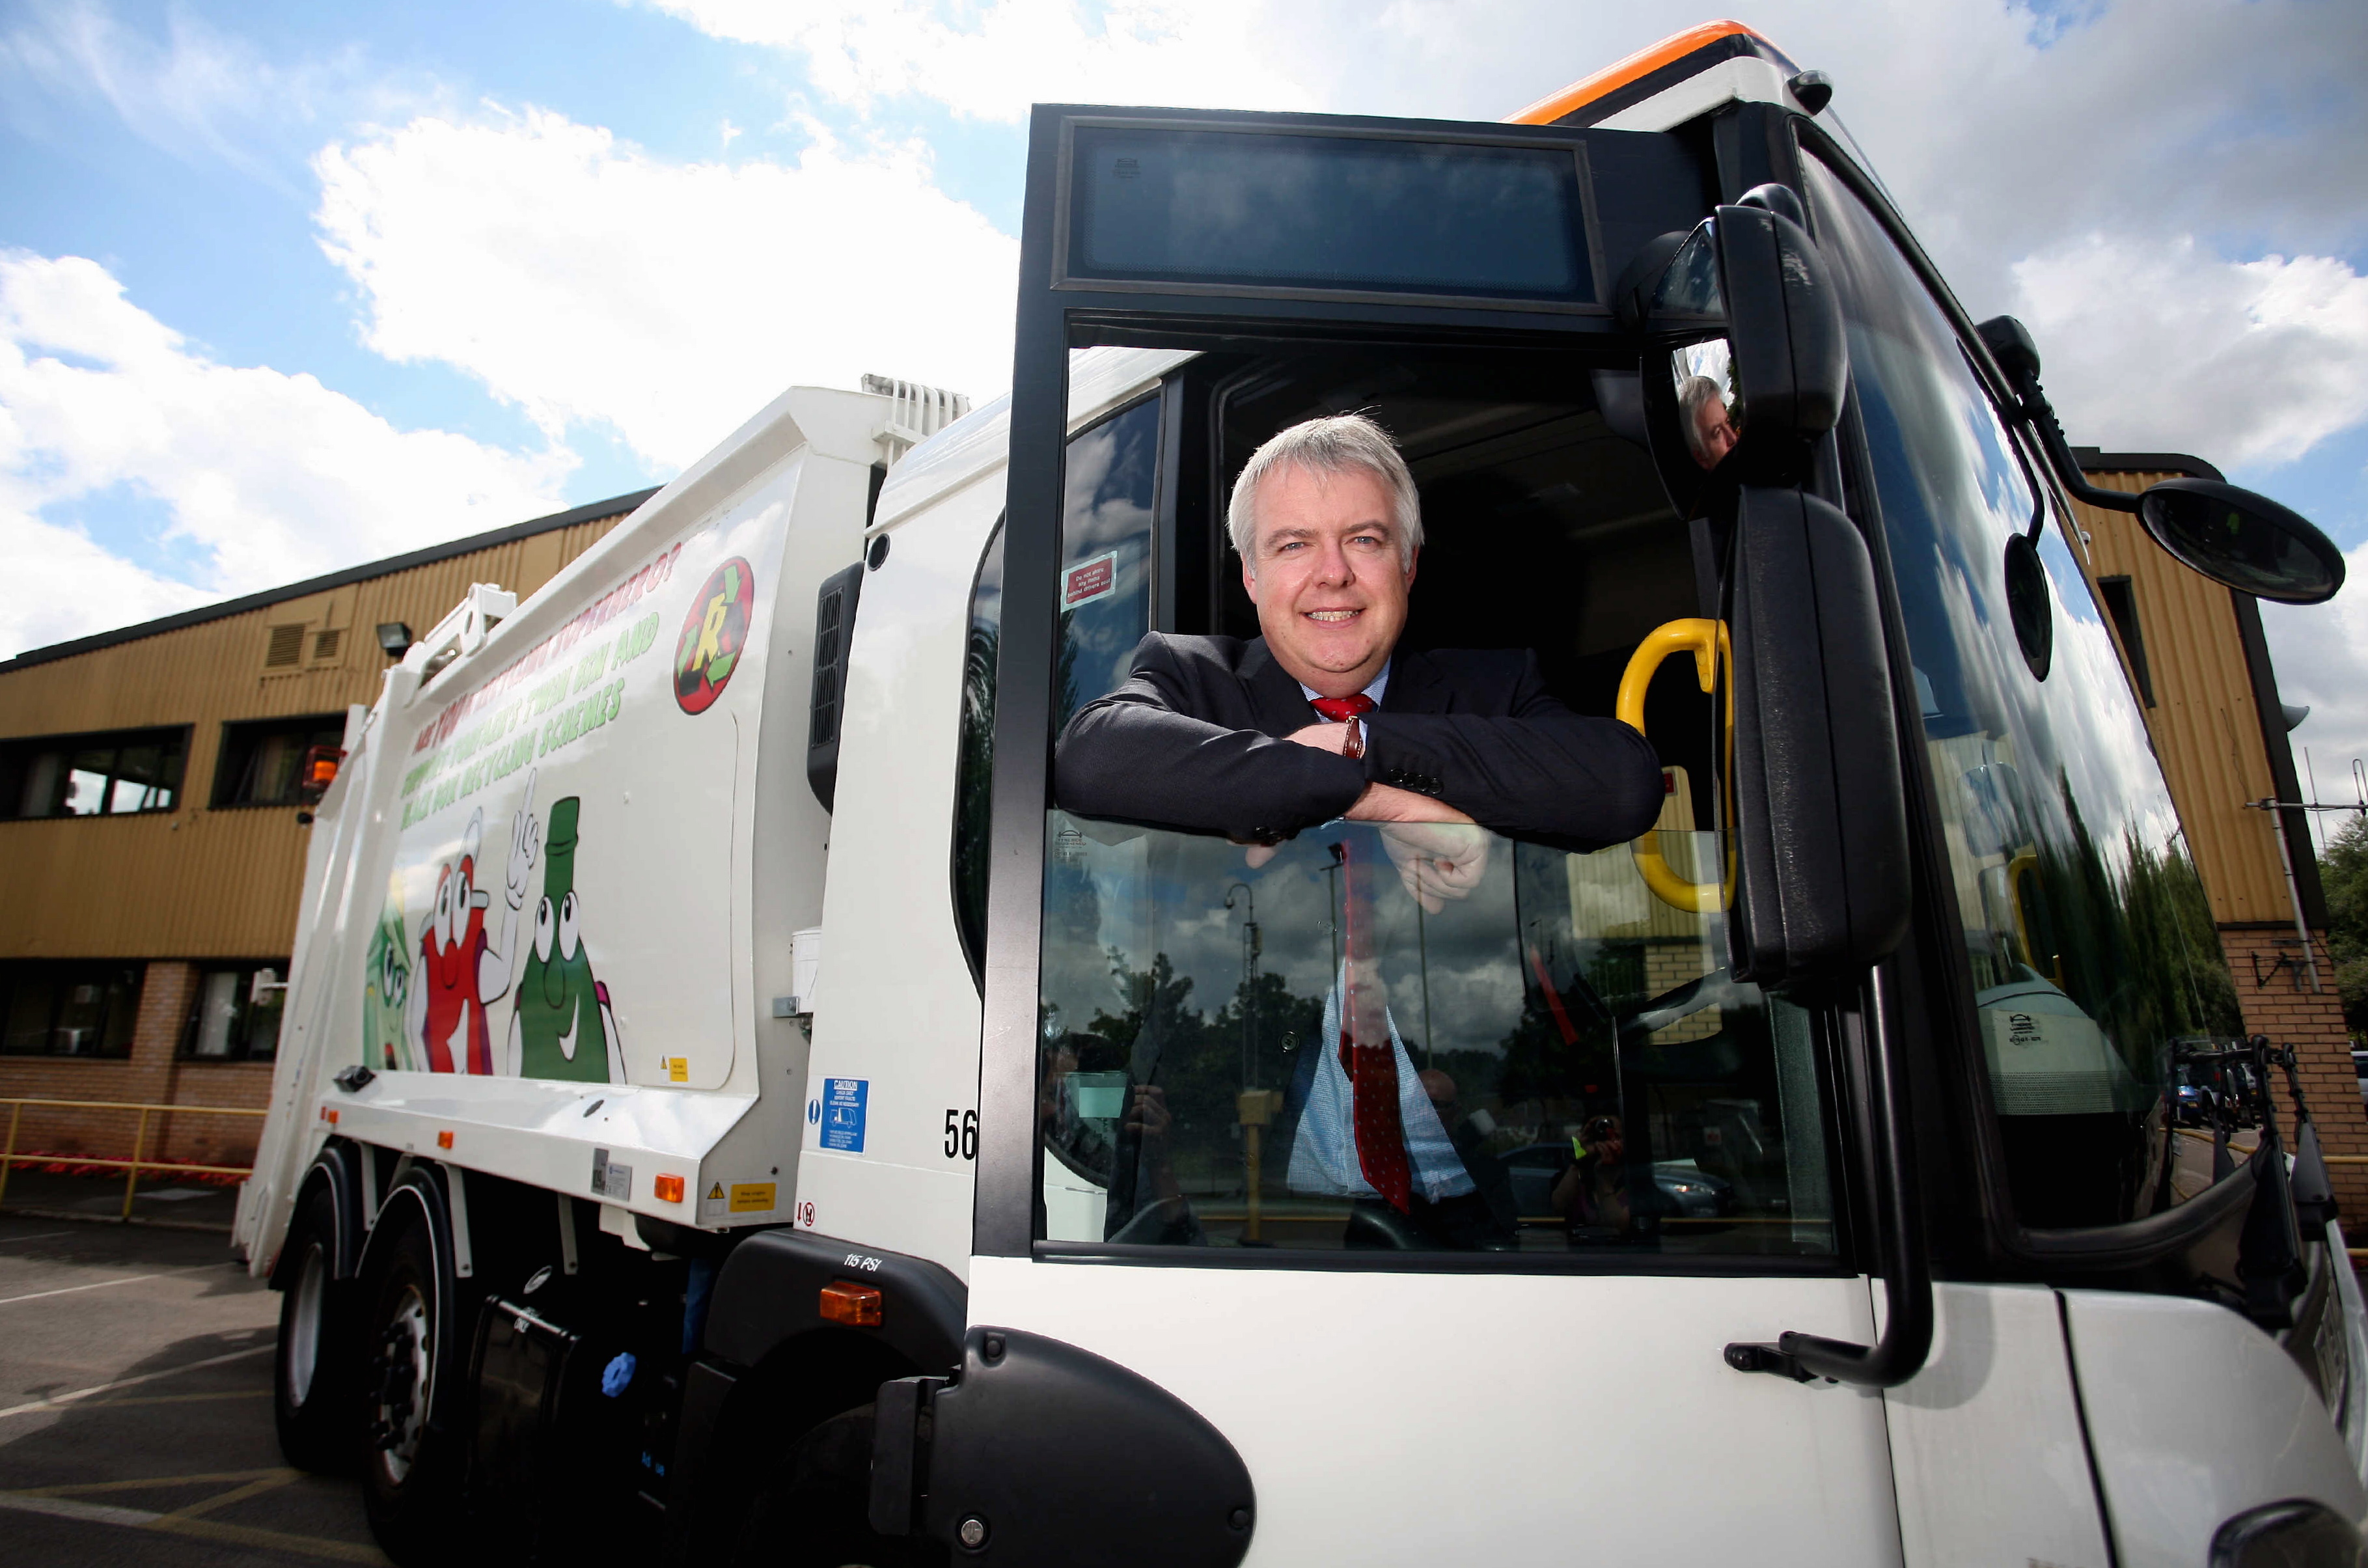 Pictured: First Minister for Wales Carwyn Jones in the cab of a refuse lorry. Thursday 22 July 2010 Re: The first minister of Wales, Carwyn Jones, is doing a tour speaking to public workers at the Neighbourhood Services department in New Inn near Pontypool where he was taken in a refuse lorry from the town's Civic Centre.